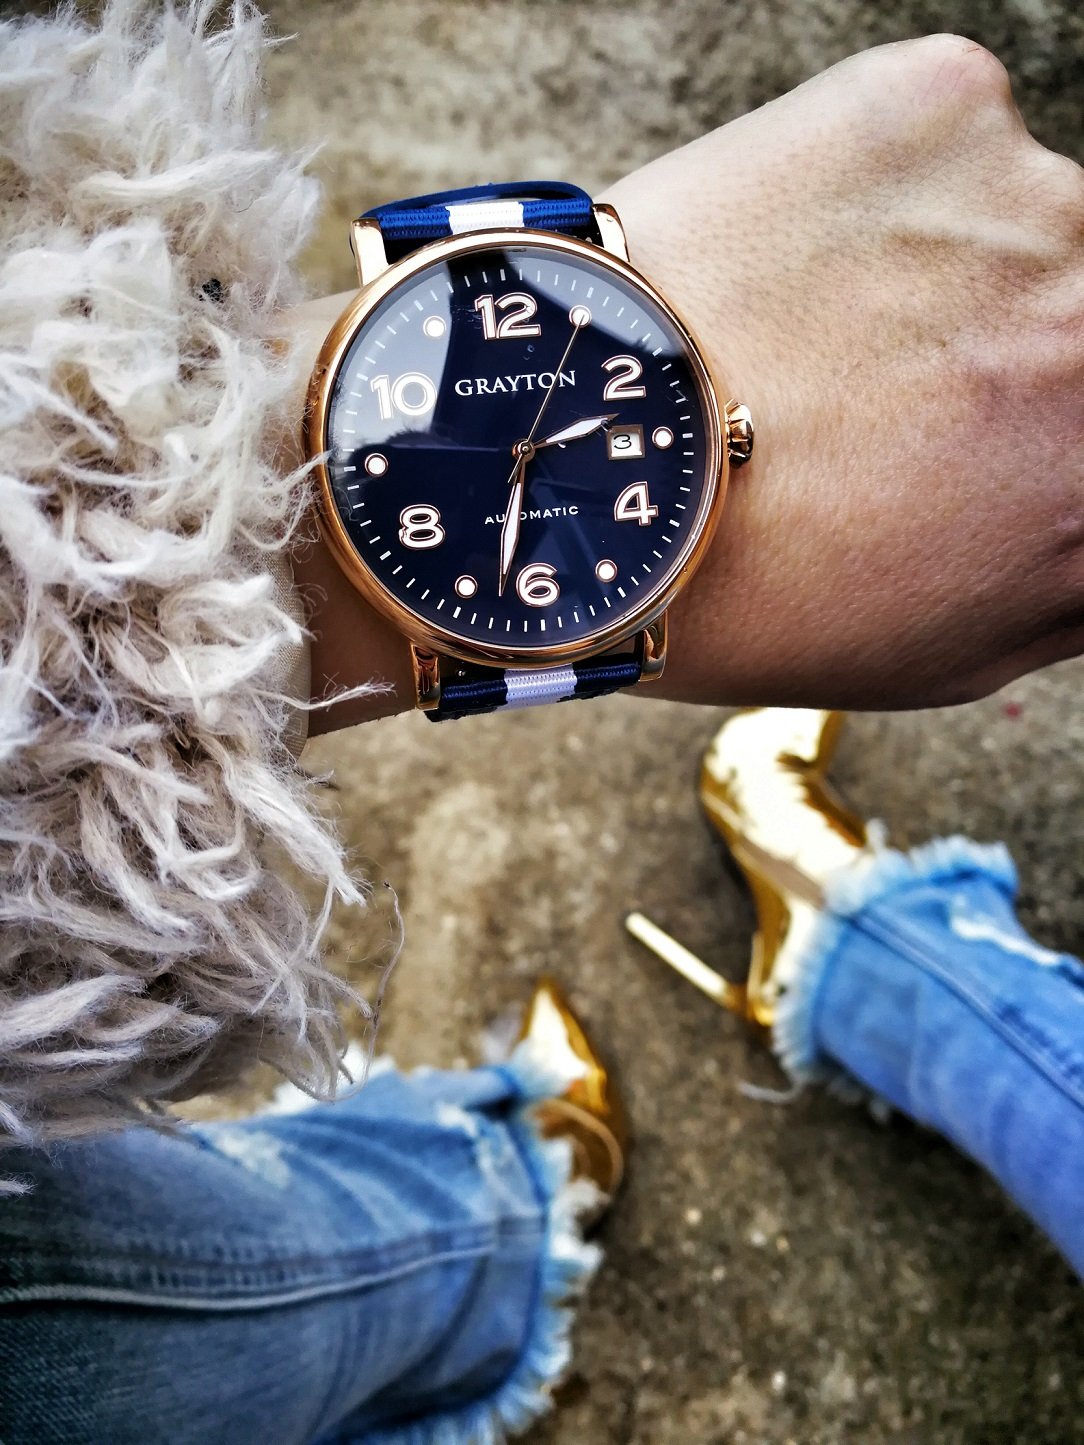 Grayton Watches - Product Review | Style & Life by Susana